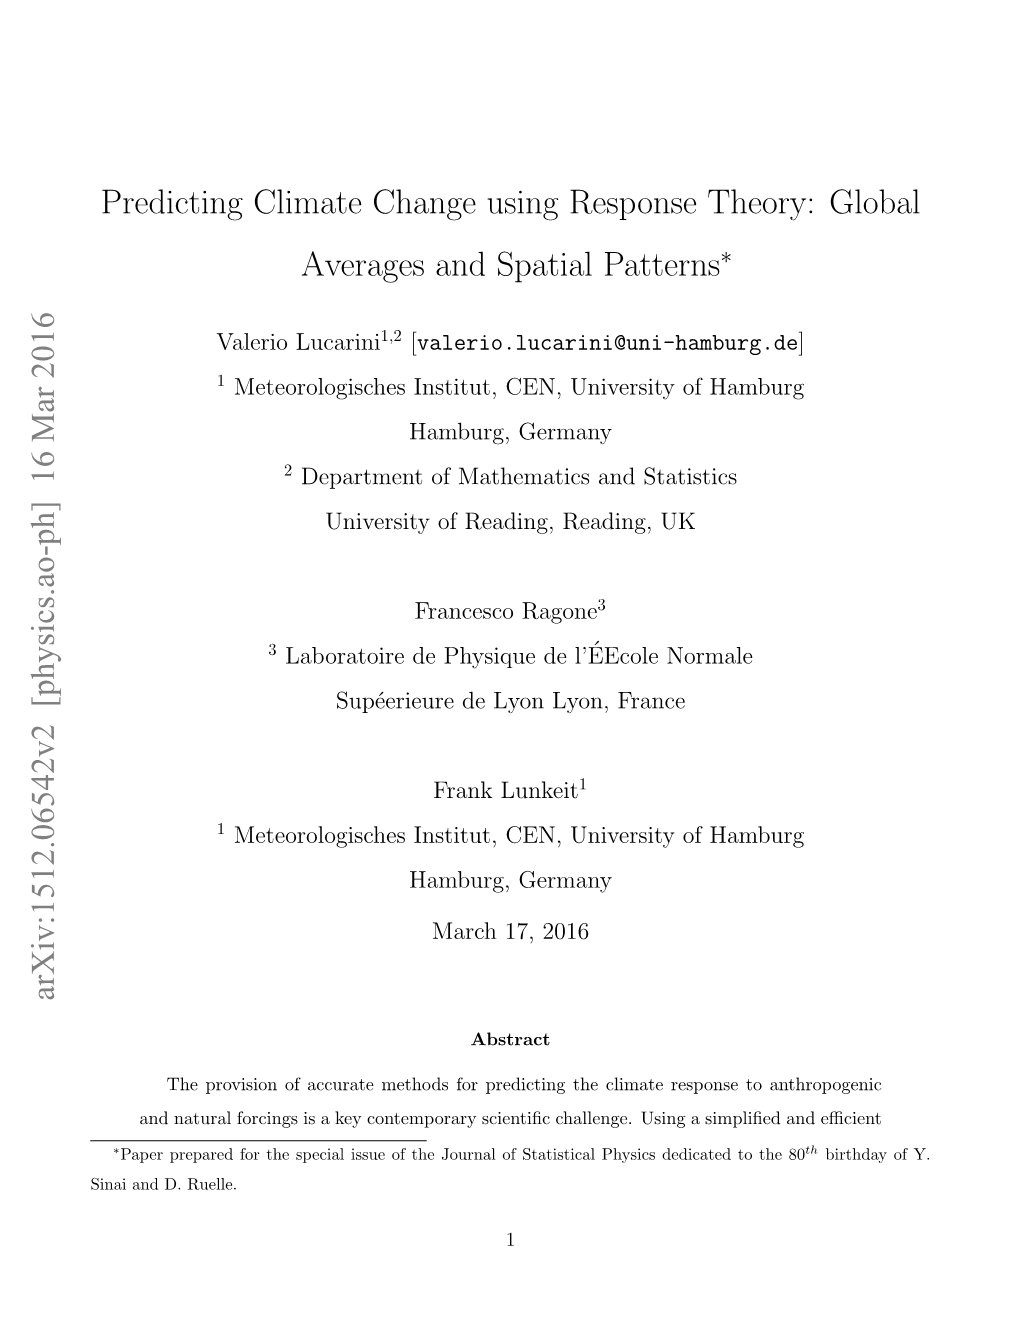 Predicting Climate Change Using Response Theory: Global Averages and Spatial Patterns∗